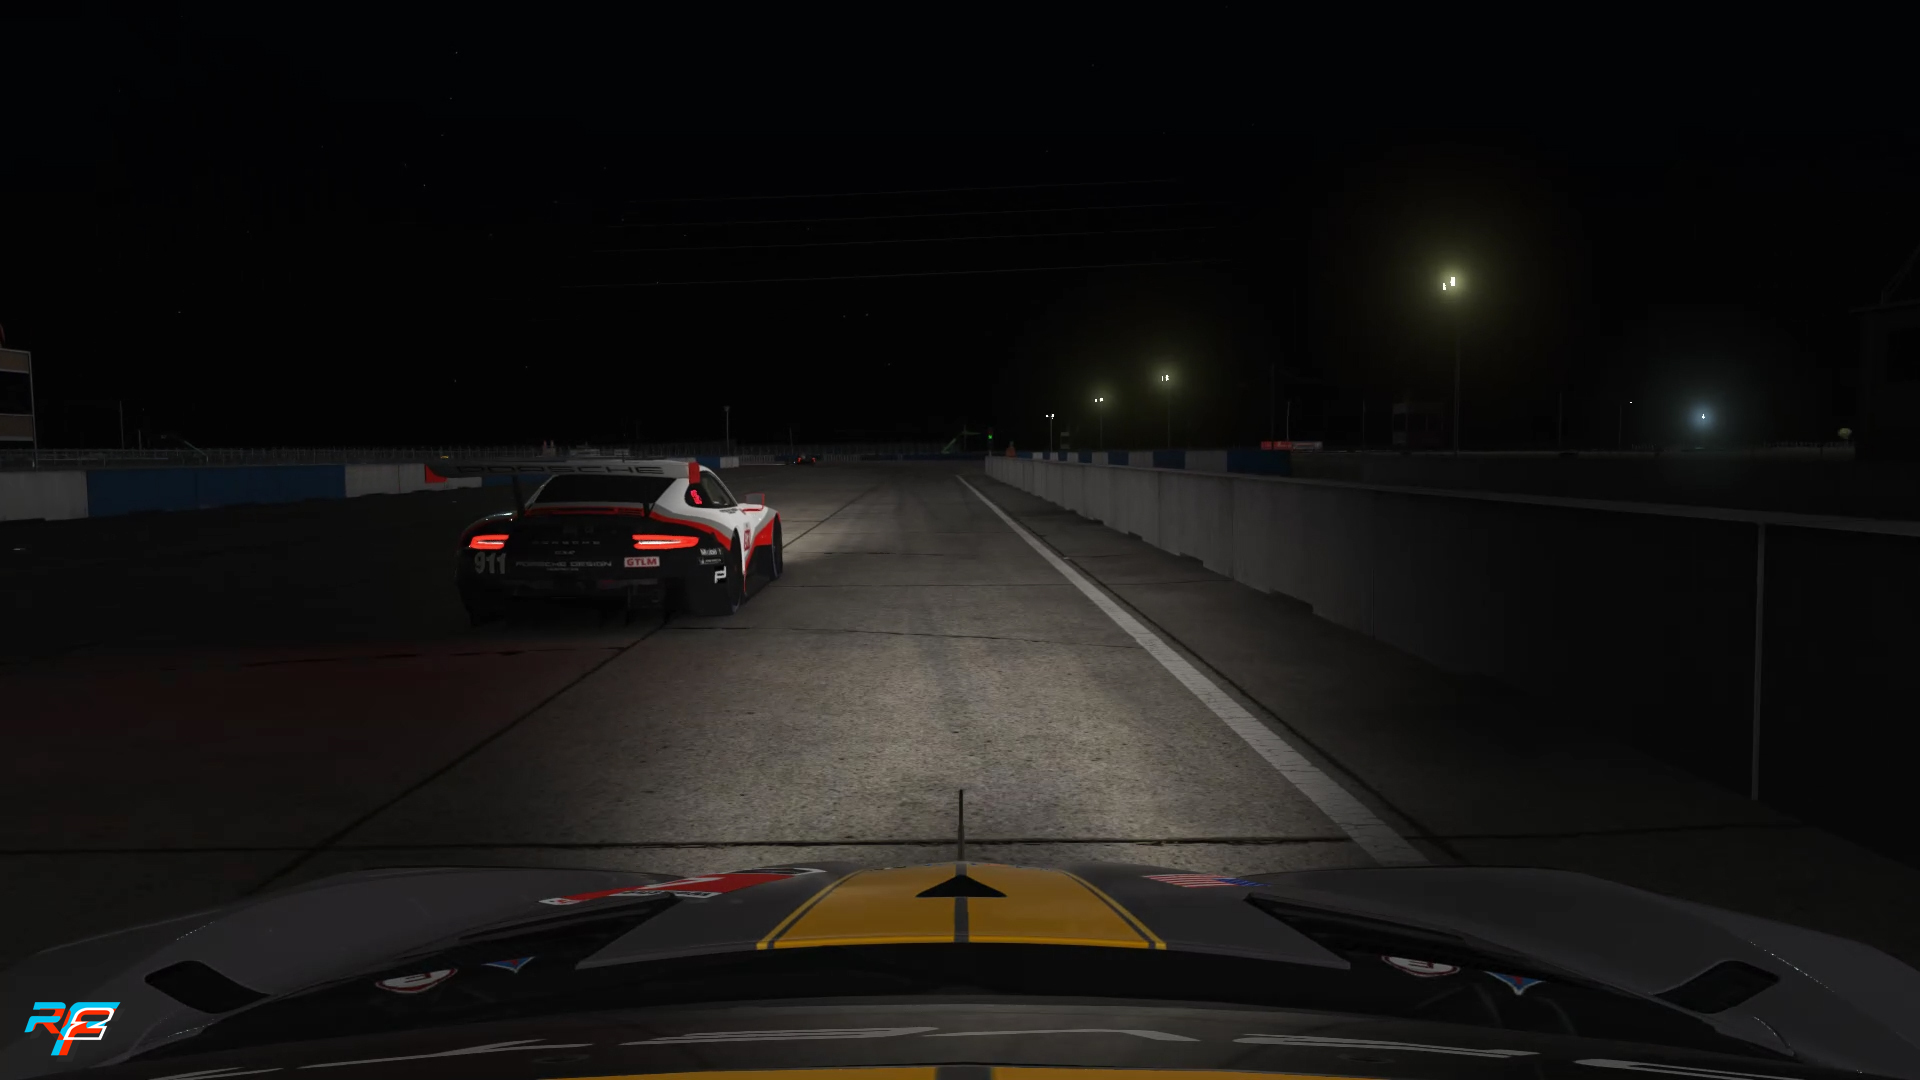 Assetto Corsa on X: It's not just our fantastic game that's been update,  we've been working hard in the background to update our website.  Introducing  your home for all things Assetto